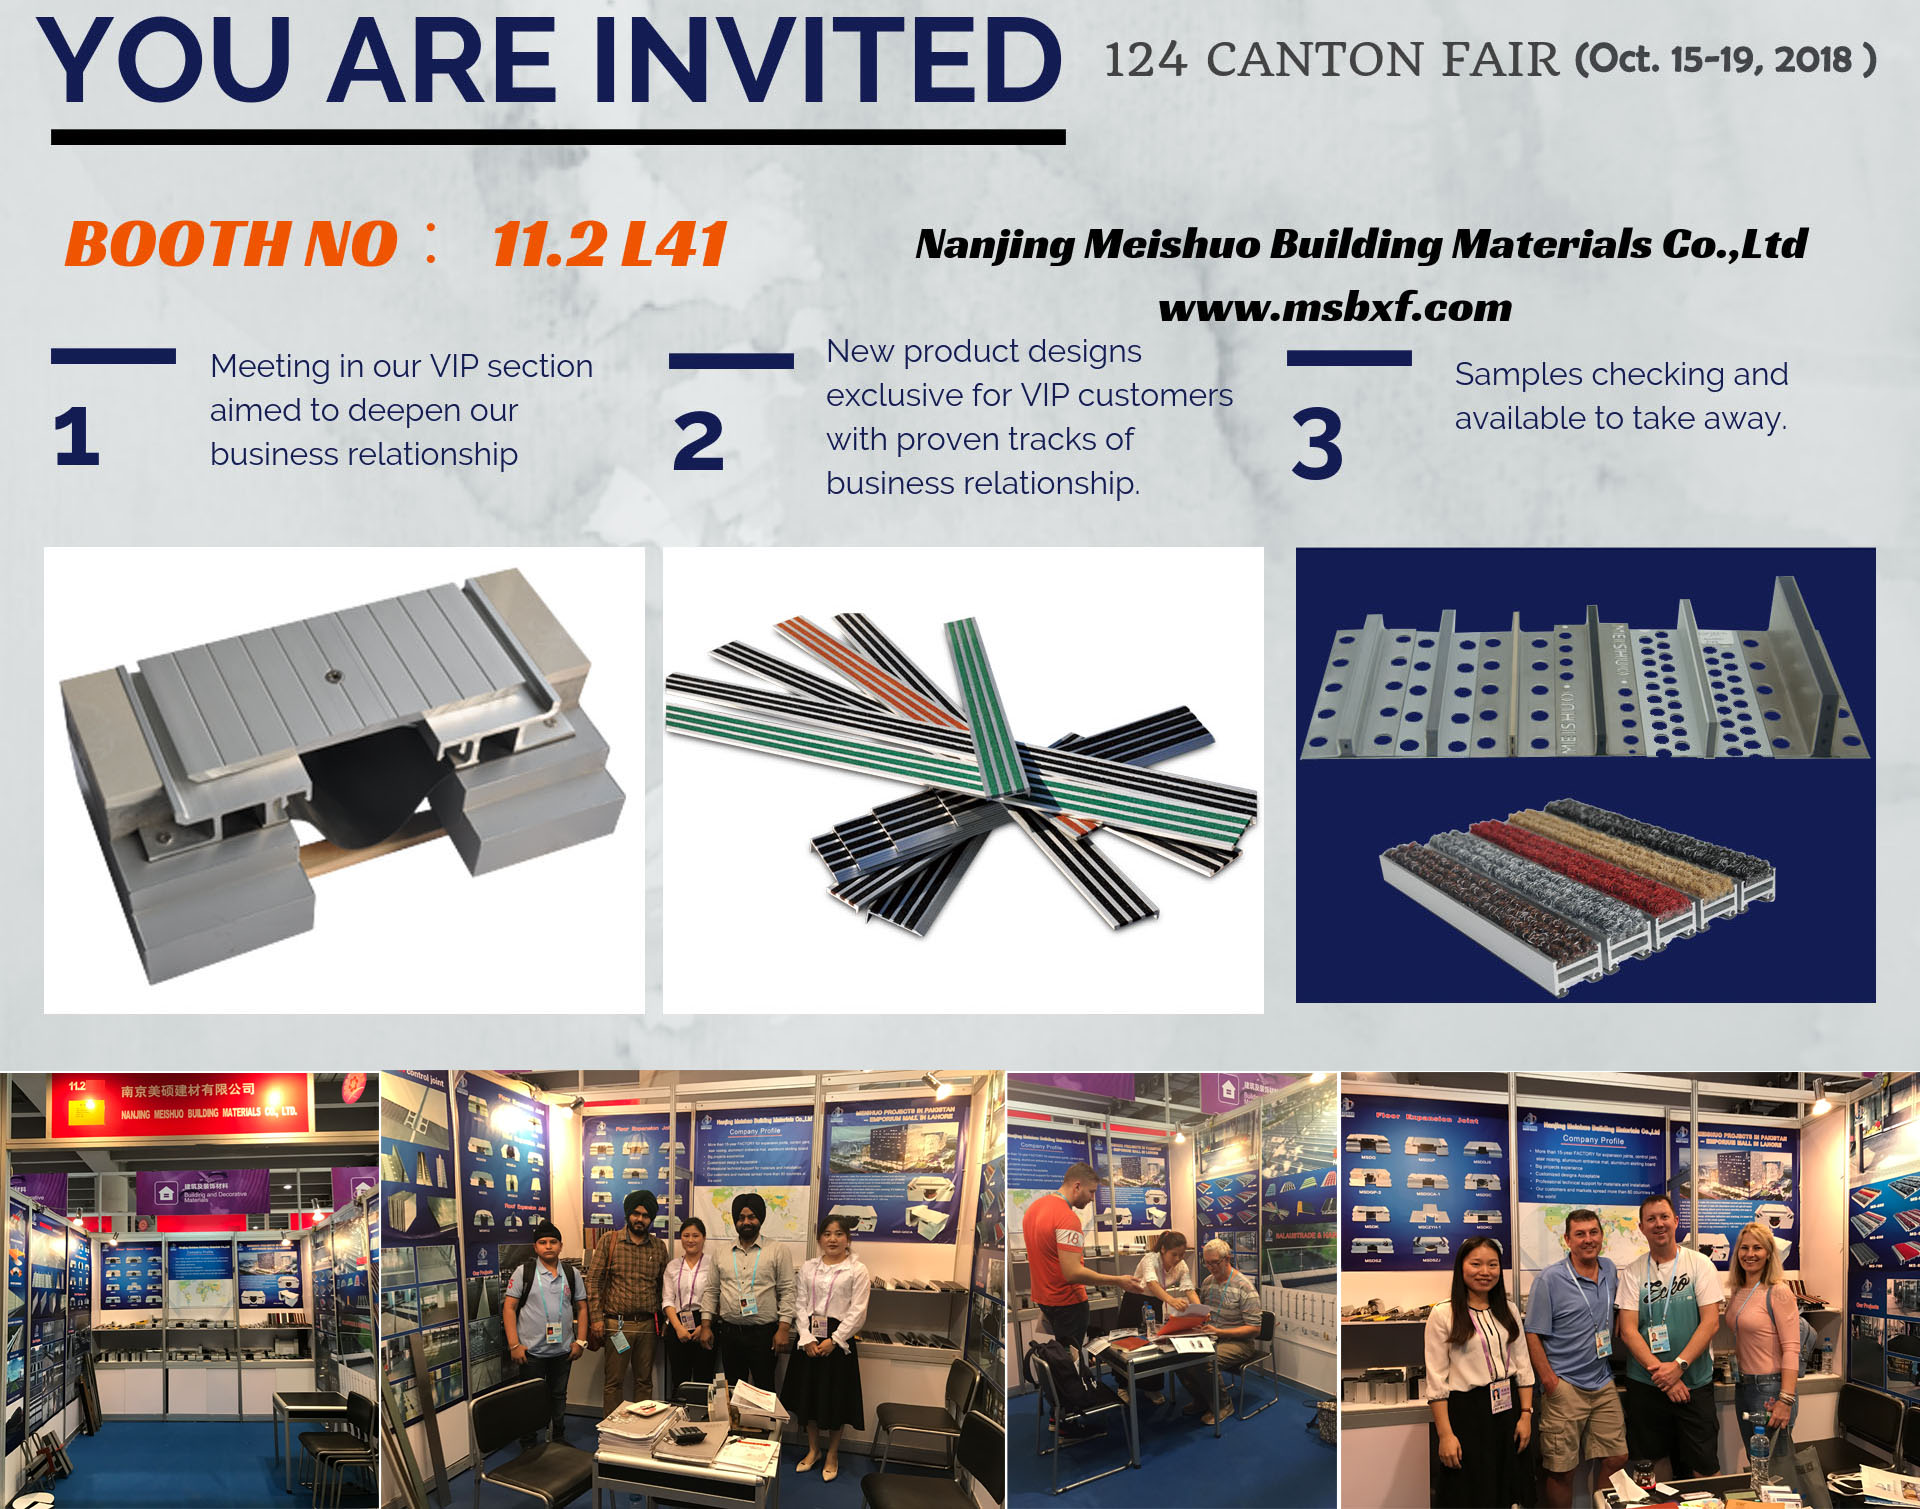 You are invited! Meet us in 124th CANTON FAIR